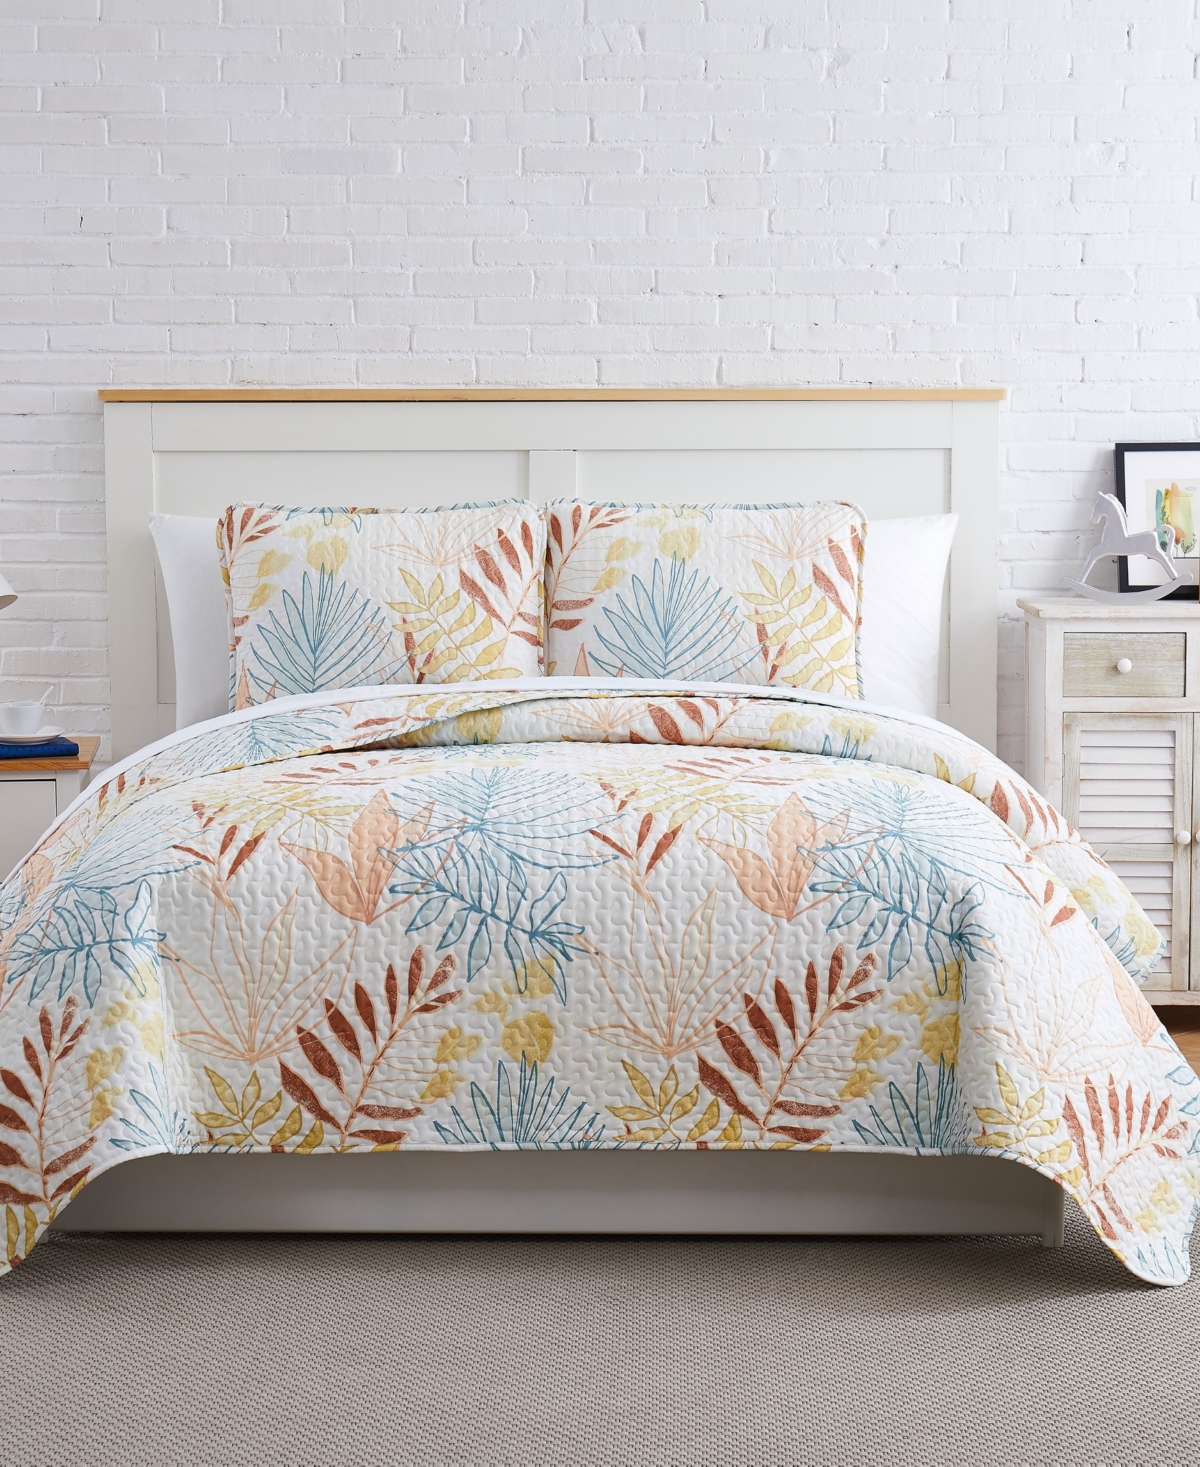 Southshore Fine Linens Tropic Leaf Quilt And Sham 3 Piece Set, Full Or Queen In Multi